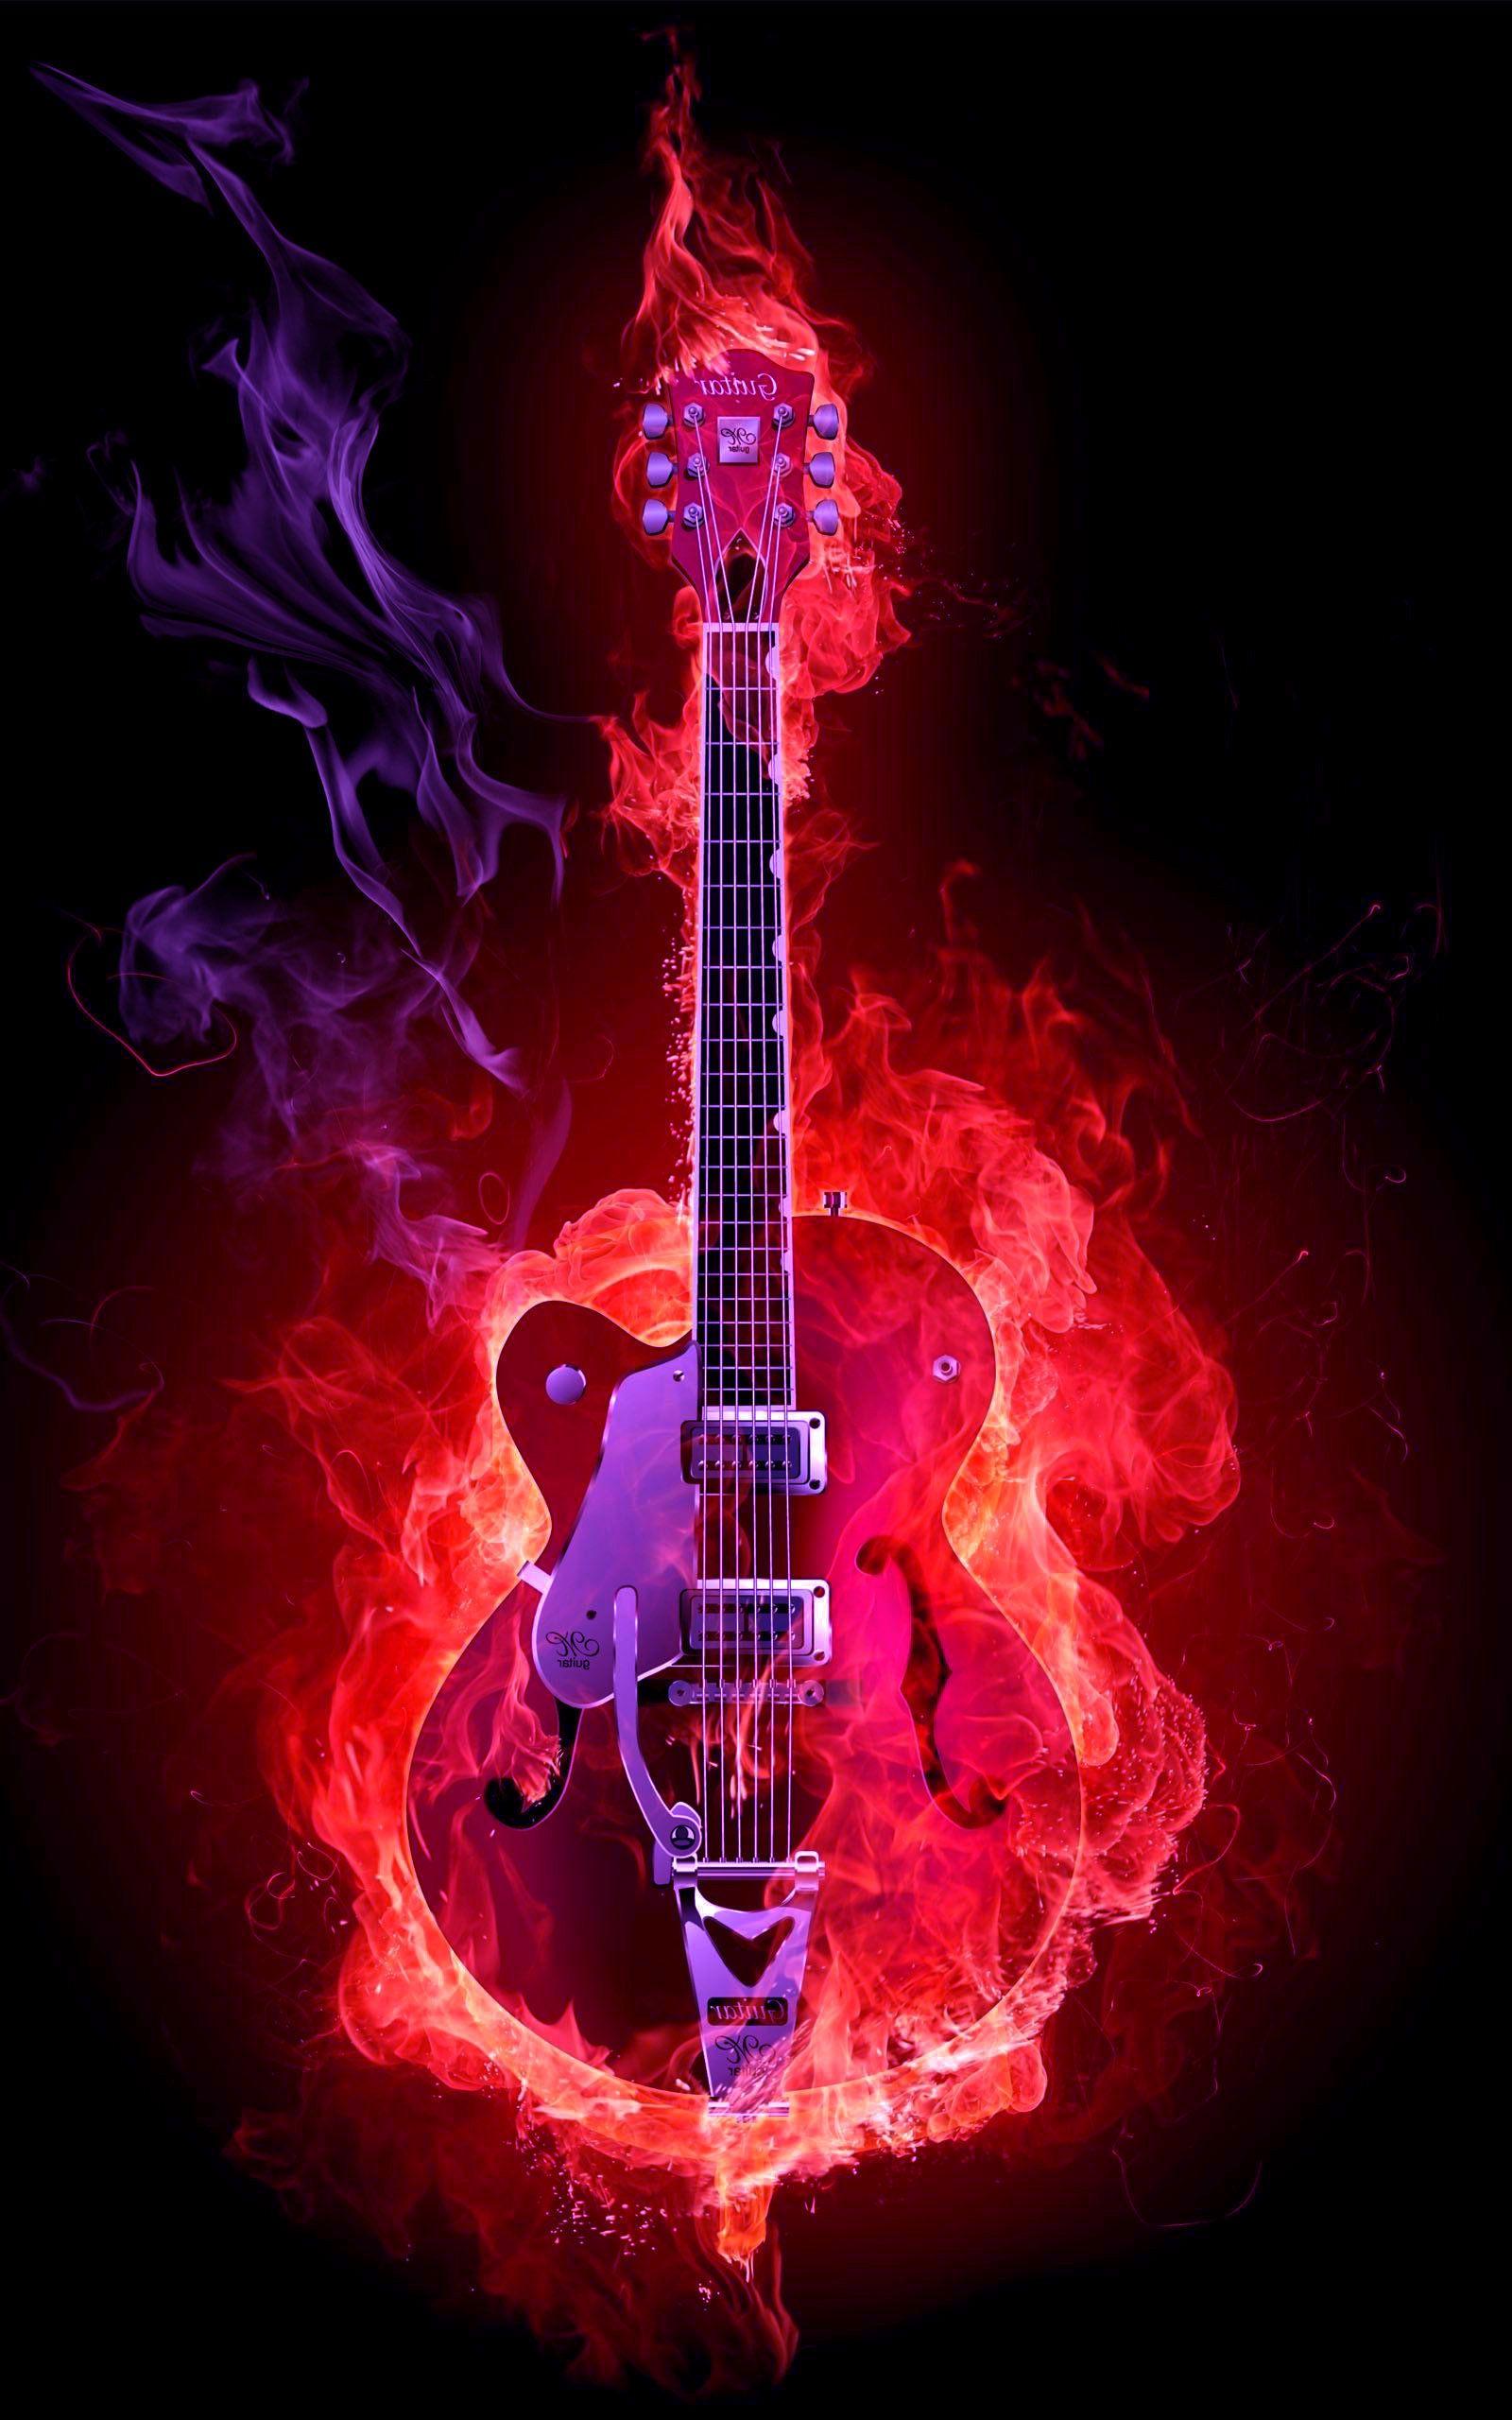 Blue Fire Electric Guitar Live Wallpaper Free Android Live Wallpaper  download  Download the Free Blue Fire Electric Guitar Live Wallpaper Live  Wallpaper to your Android phone or tablet